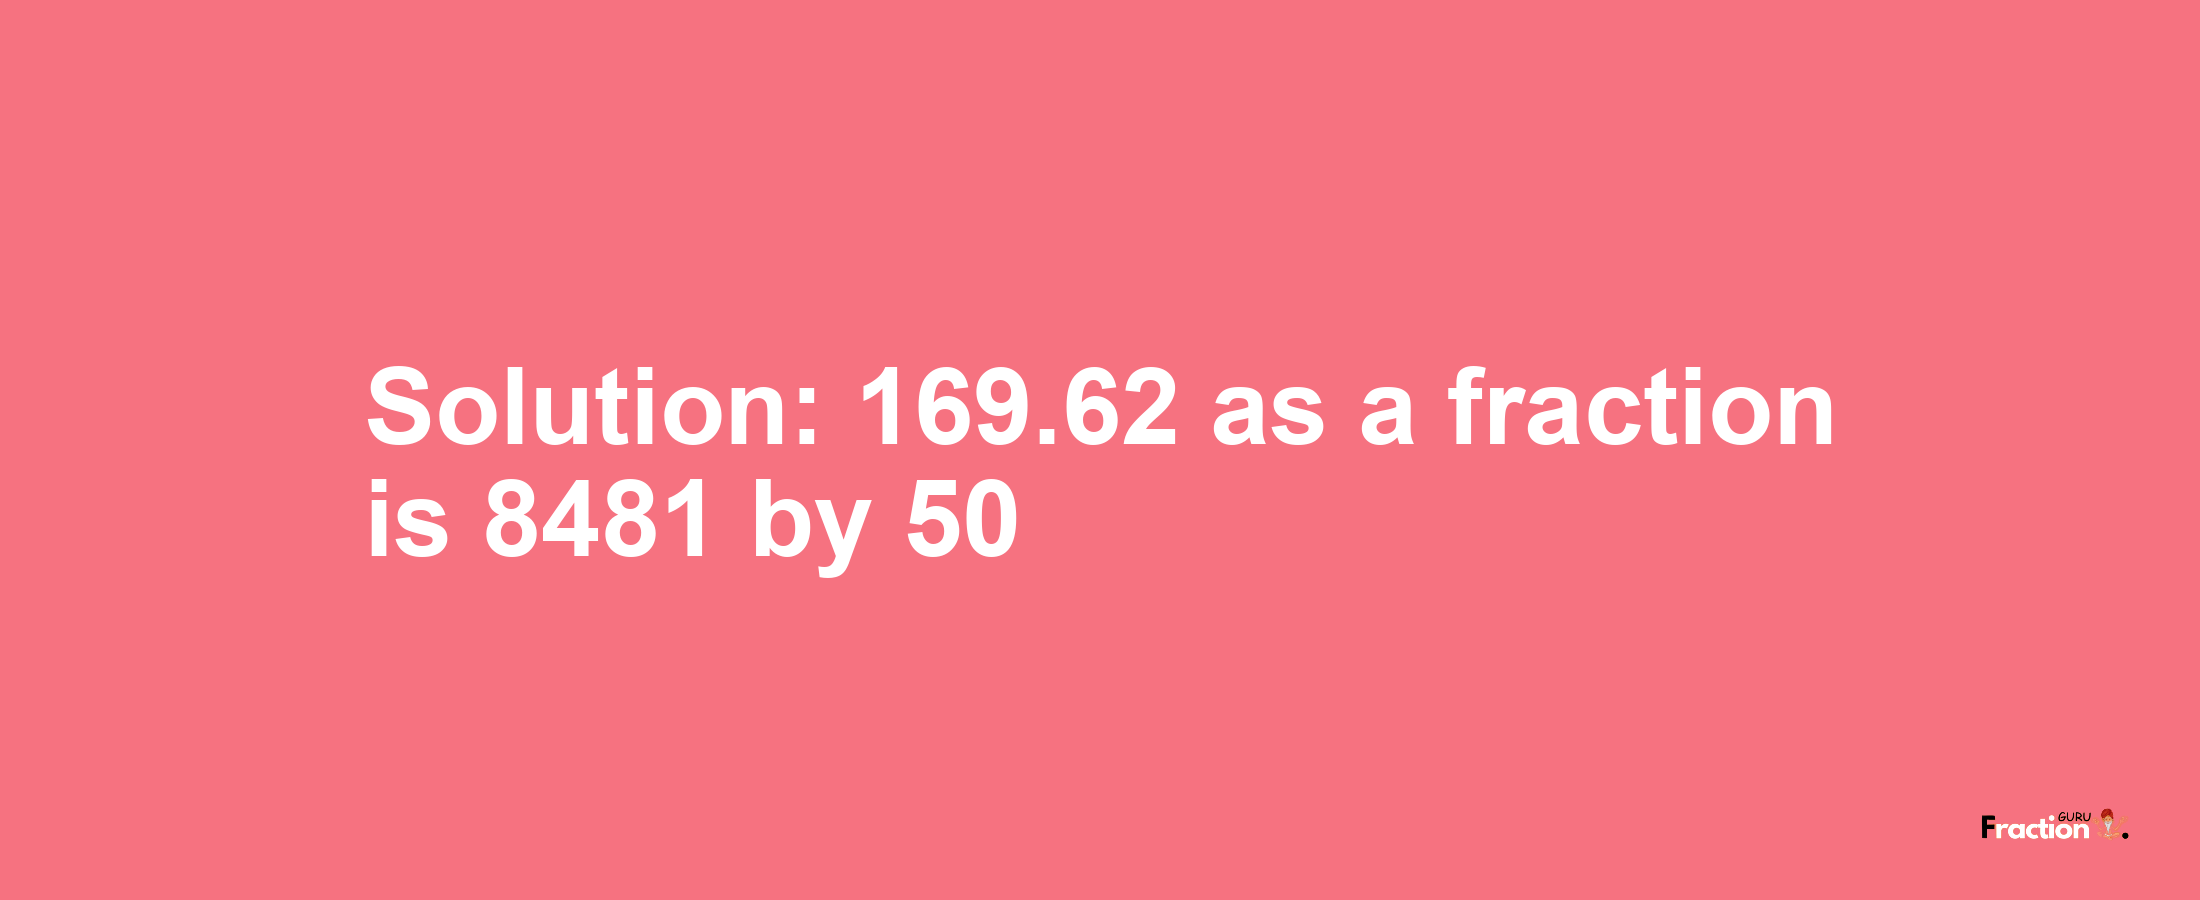 Solution:169.62 as a fraction is 8481/50